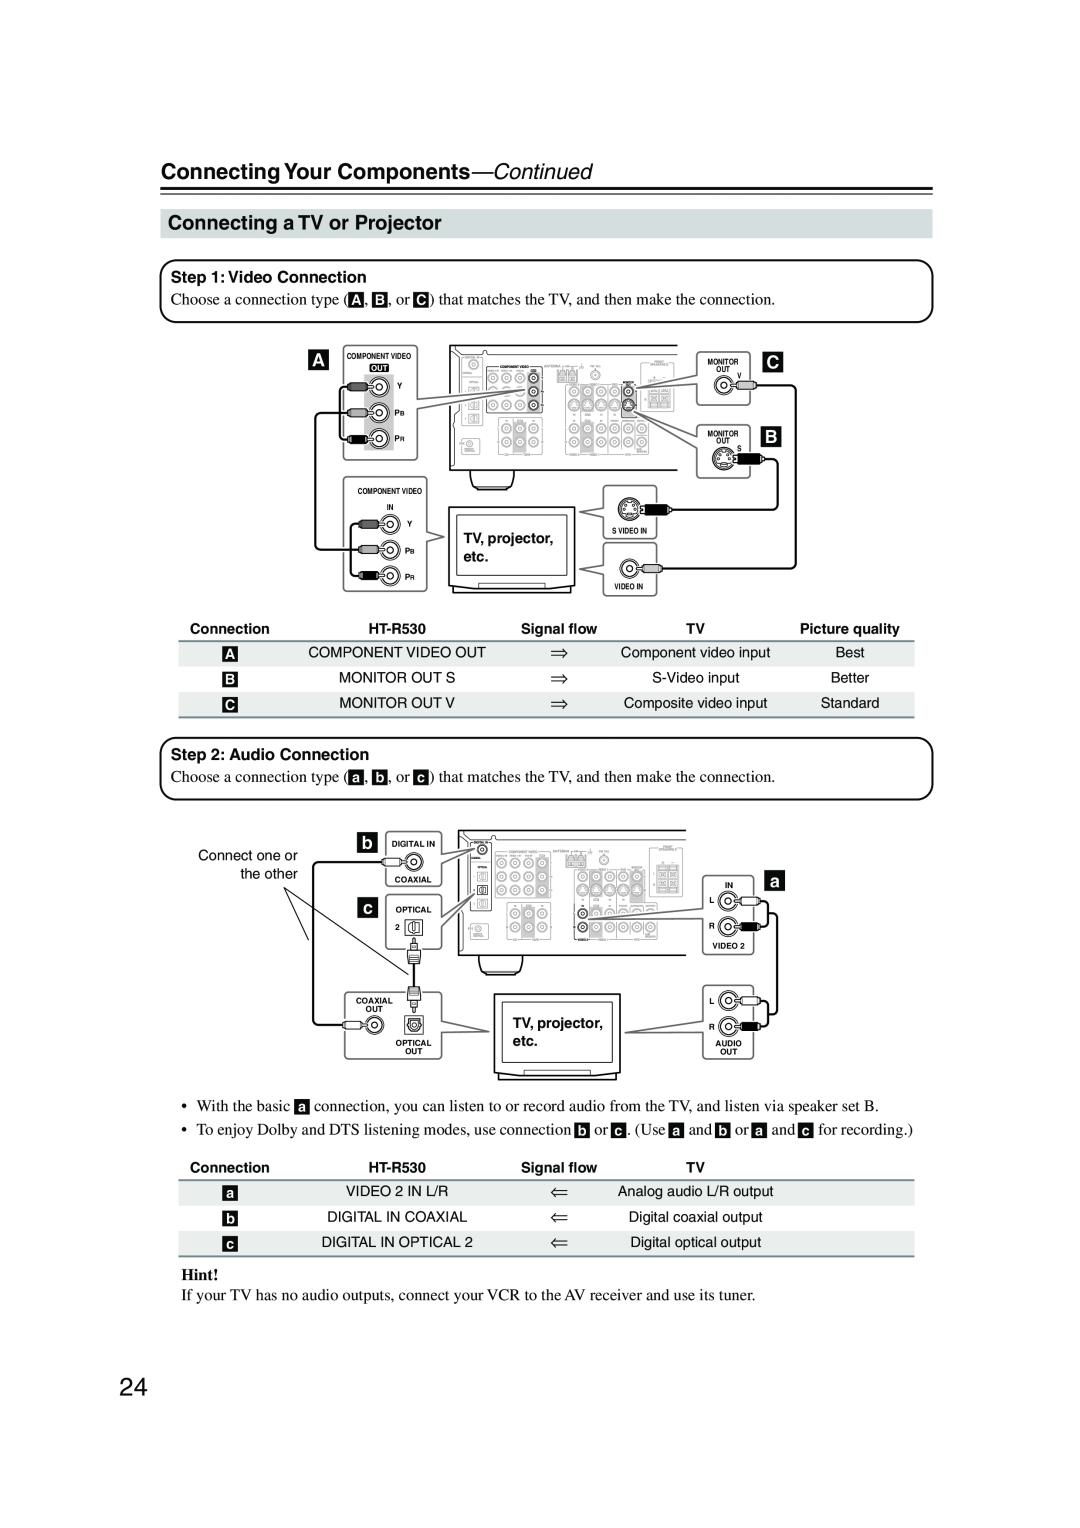 Onkyo HT-S780 instruction manual Connecting a TV or Projector, Connecting Your Components—Continued, Hint 